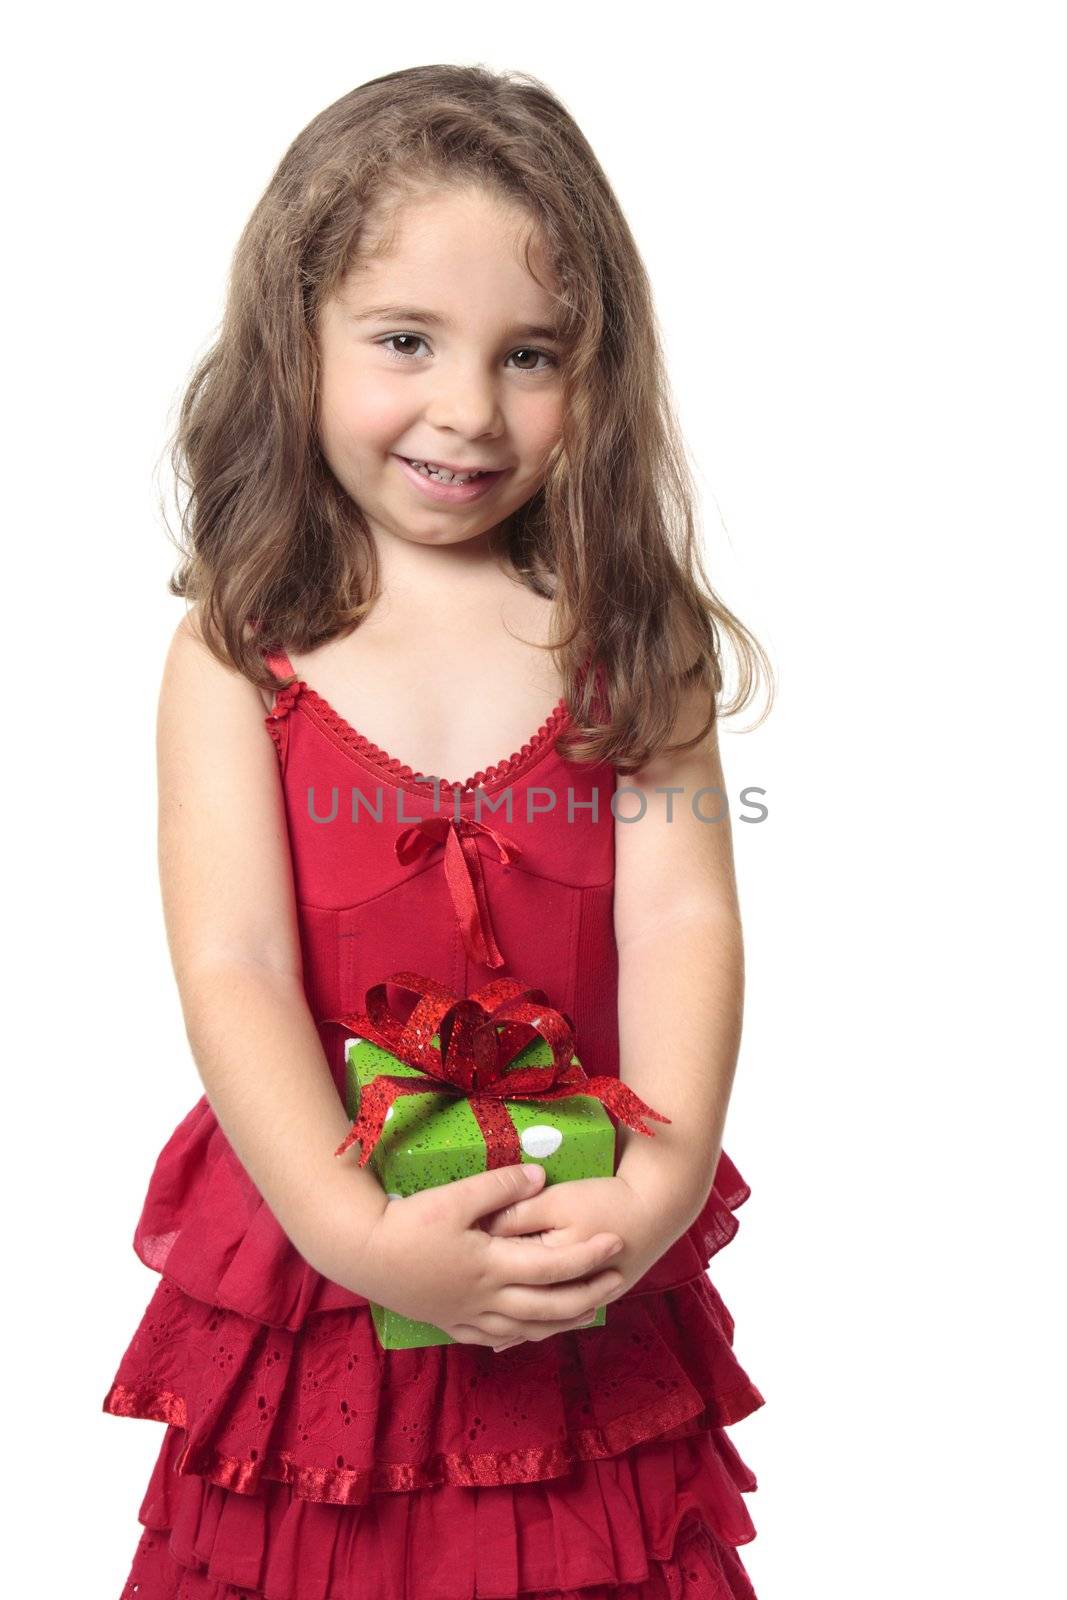 Pretty girl holding a present by lovleah